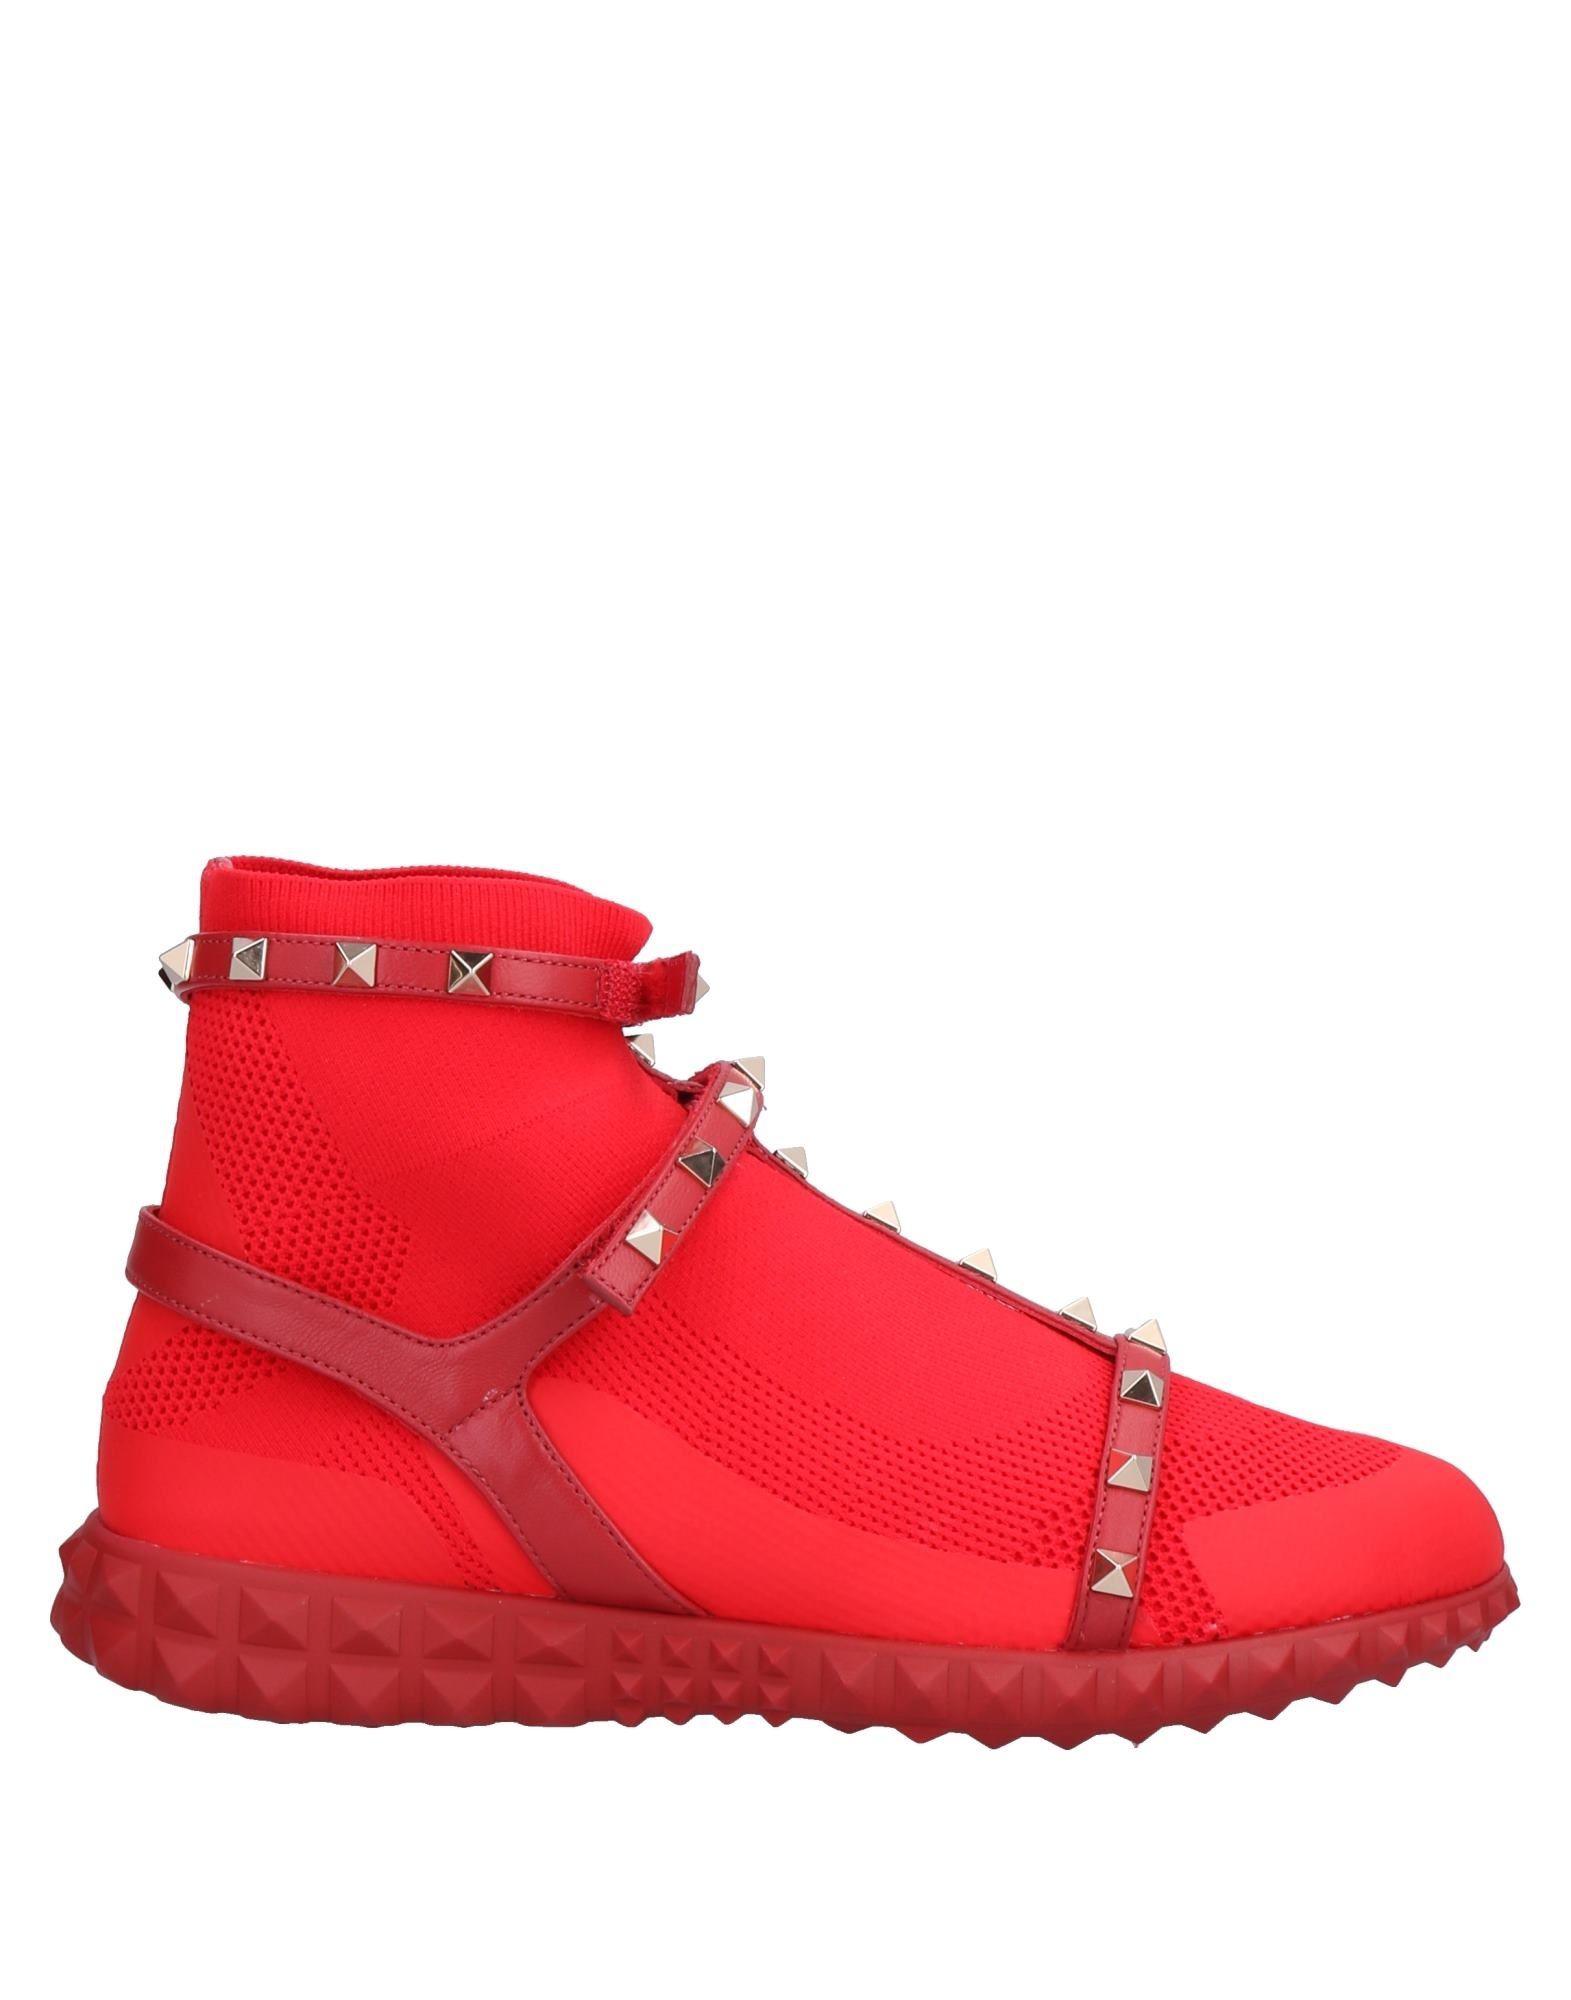 Valentino Garavani Rubber High-tops & Sneakers in Red - Save 12% - Lyst